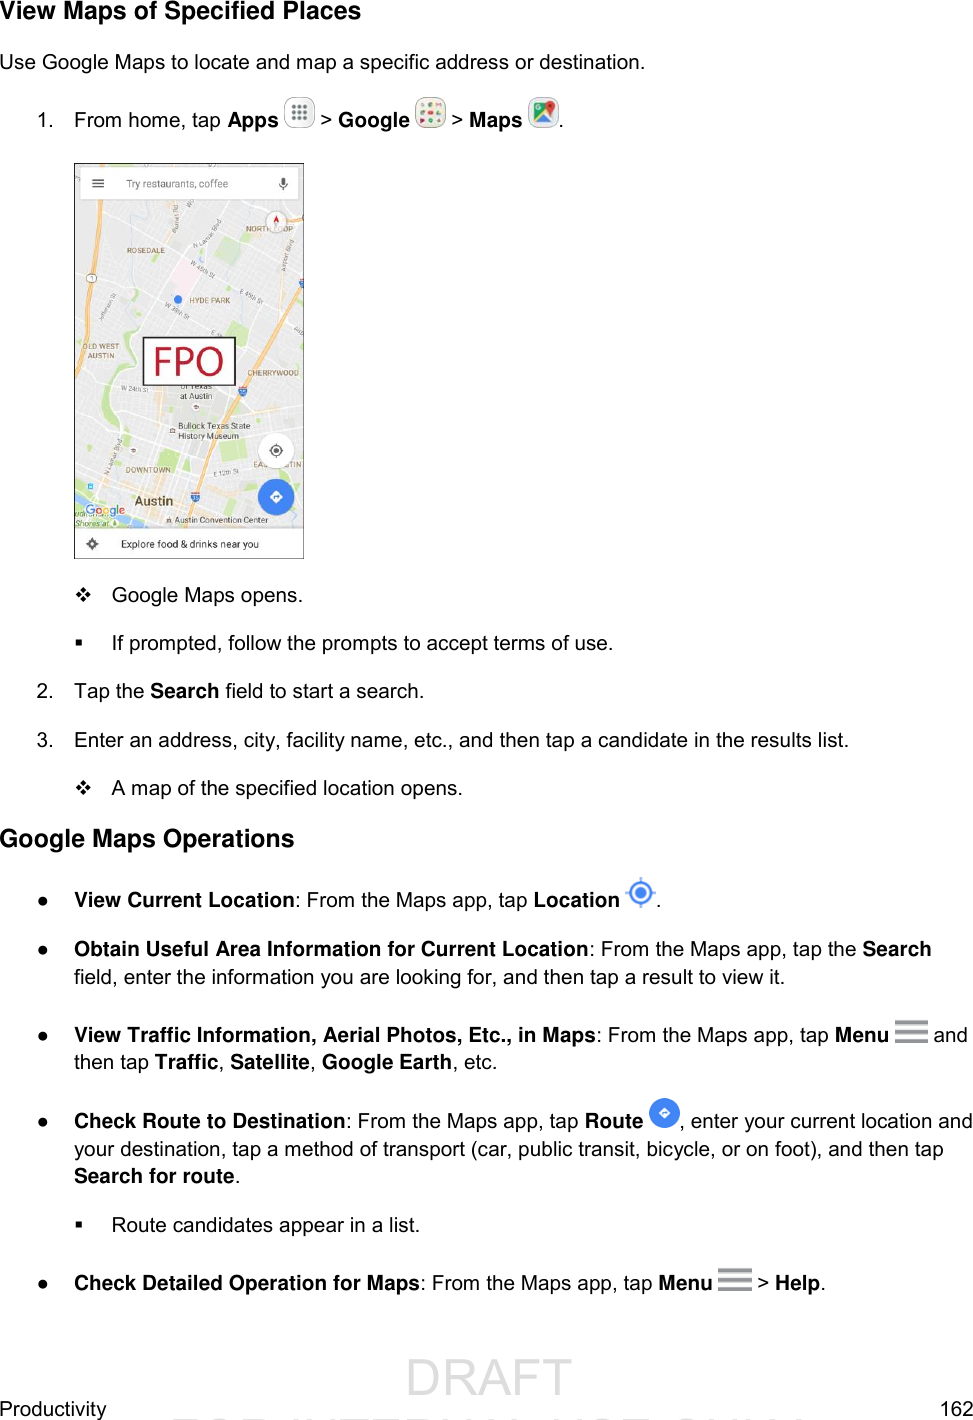                  DRAFT FOR INTERNAL USE ONLYProductivity  162 View Maps of Specified Places Use Google Maps to locate and map a specific address or destination. 1.  From home, tap Apps   &gt; Google   &gt; Maps  .     Google Maps opens.   If prompted, follow the prompts to accept terms of use. 2.  Tap the Search field to start a search.  3.  Enter an address, city, facility name, etc., and then tap a candidate in the results list.    A map of the specified location opens. Google Maps Operations ● View Current Location: From the Maps app, tap Location  . ● Obtain Useful Area Information for Current Location: From the Maps app, tap the Search field, enter the information you are looking for, and then tap a result to view it. ● View Traffic Information, Aerial Photos, Etc., in Maps: From the Maps app, tap Menu   and then tap Traffic, Satellite, Google Earth, etc.  ● Check Route to Destination: From the Maps app, tap Route  , enter your current location and your destination, tap a method of transport (car, public transit, bicycle, or on foot), and then tap Search for route.   Route candidates appear in a list. ● Check Detailed Operation for Maps: From the Maps app, tap Menu   &gt; Help. 